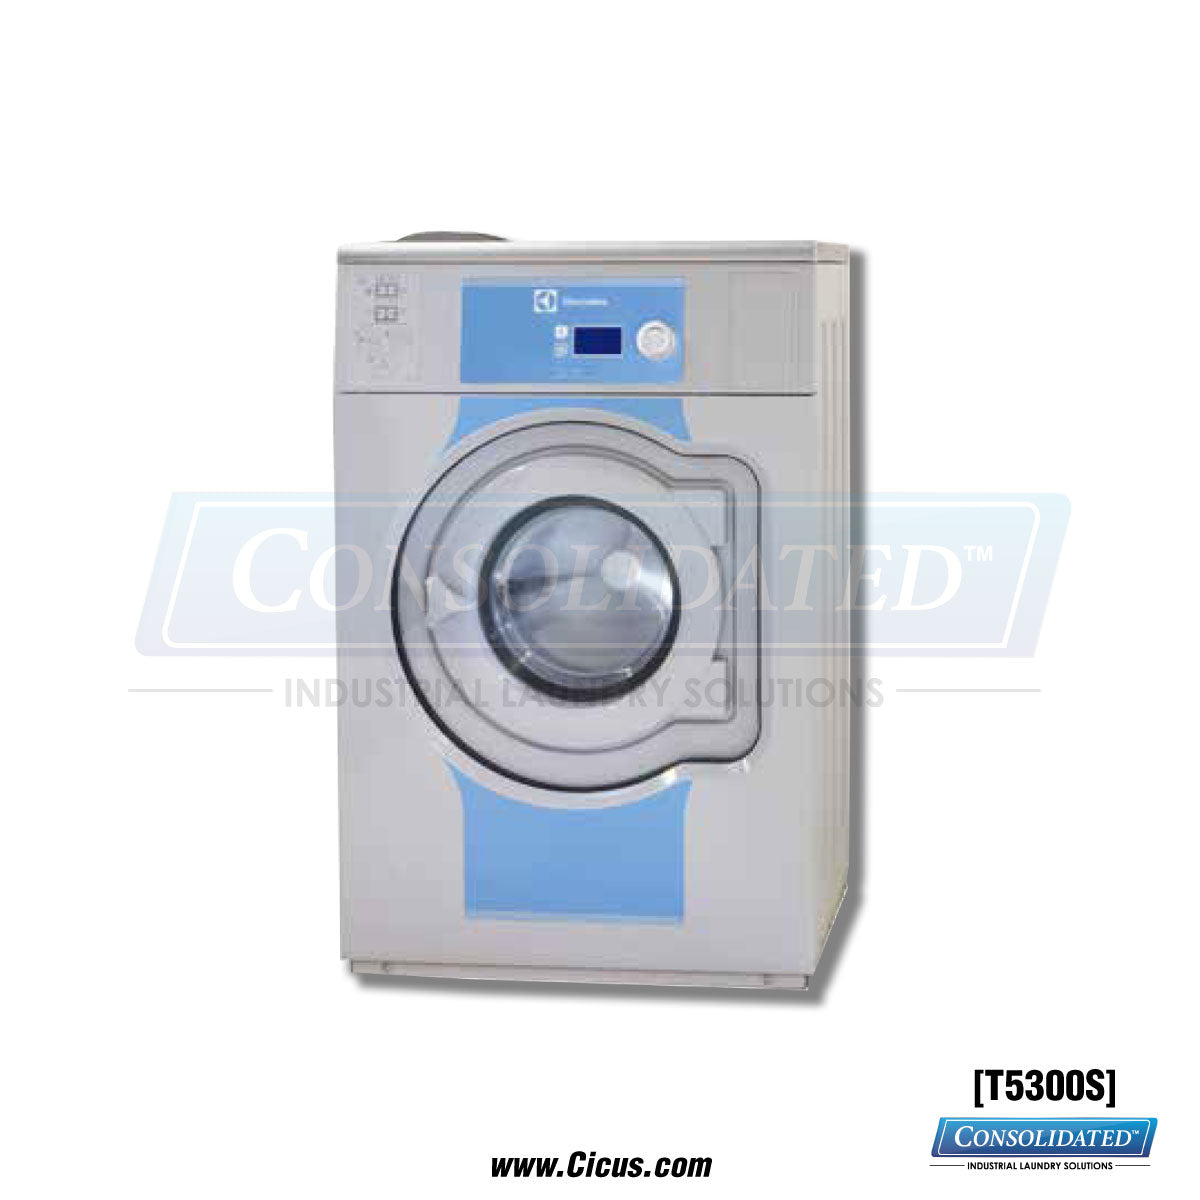 Electrolux Professional Line 5000 Dryer [T5300S]